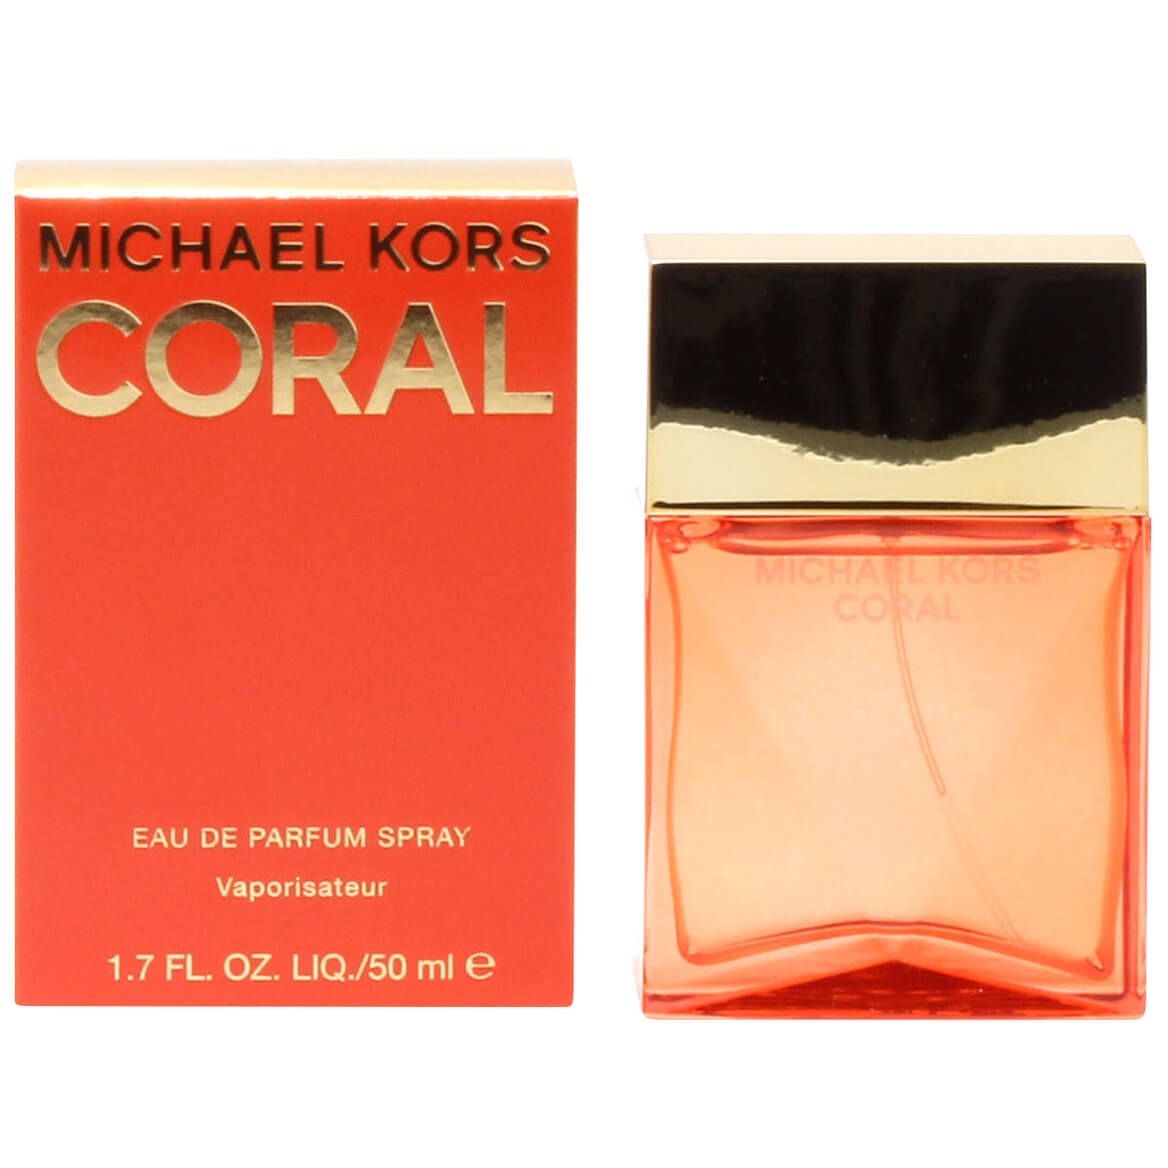 Coral by Michael Kors for Women EDP, 1.7 oz. + '-' + 373117